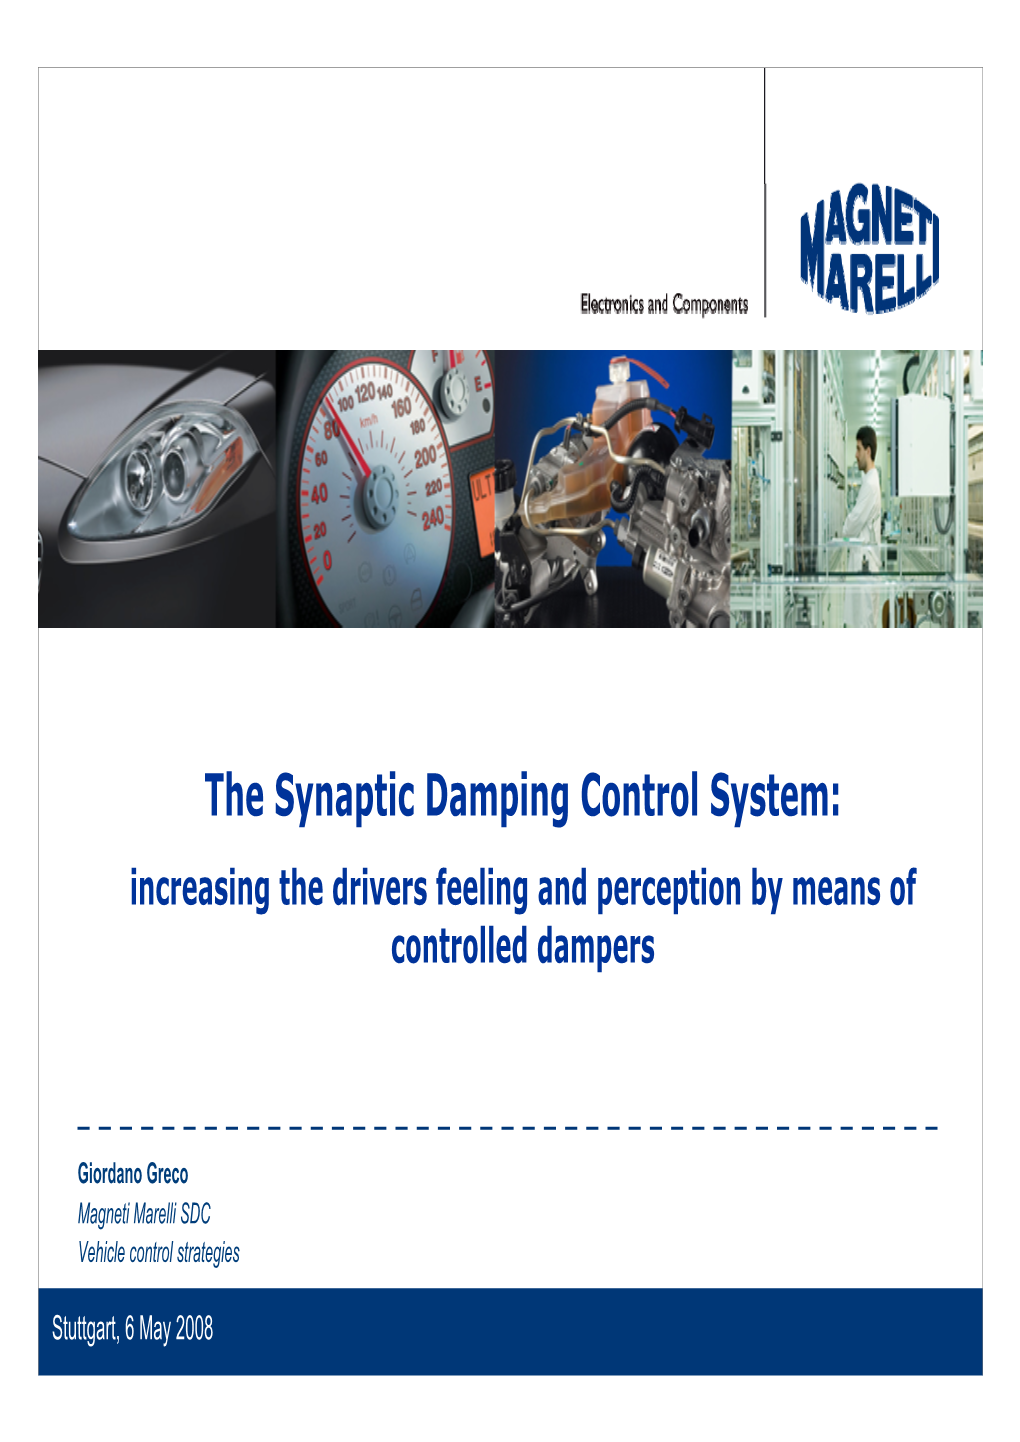 The Synaptic Damping Control System: Increasing the Drivers Feeling and Perception by Means of Controlled Dampers